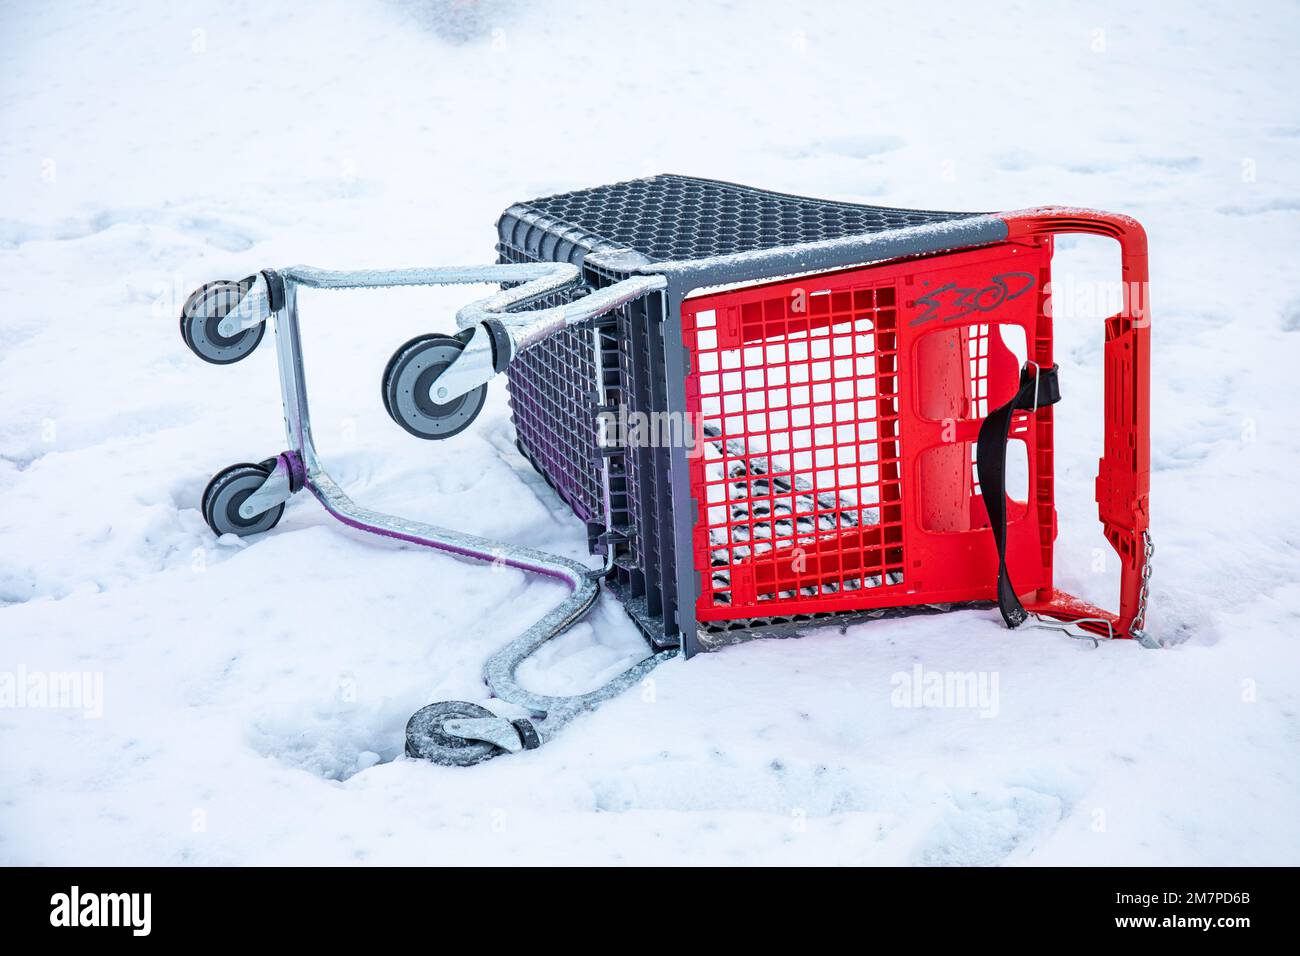 Overturned shopping cart or supermarket trolley in the snow Stock Photo